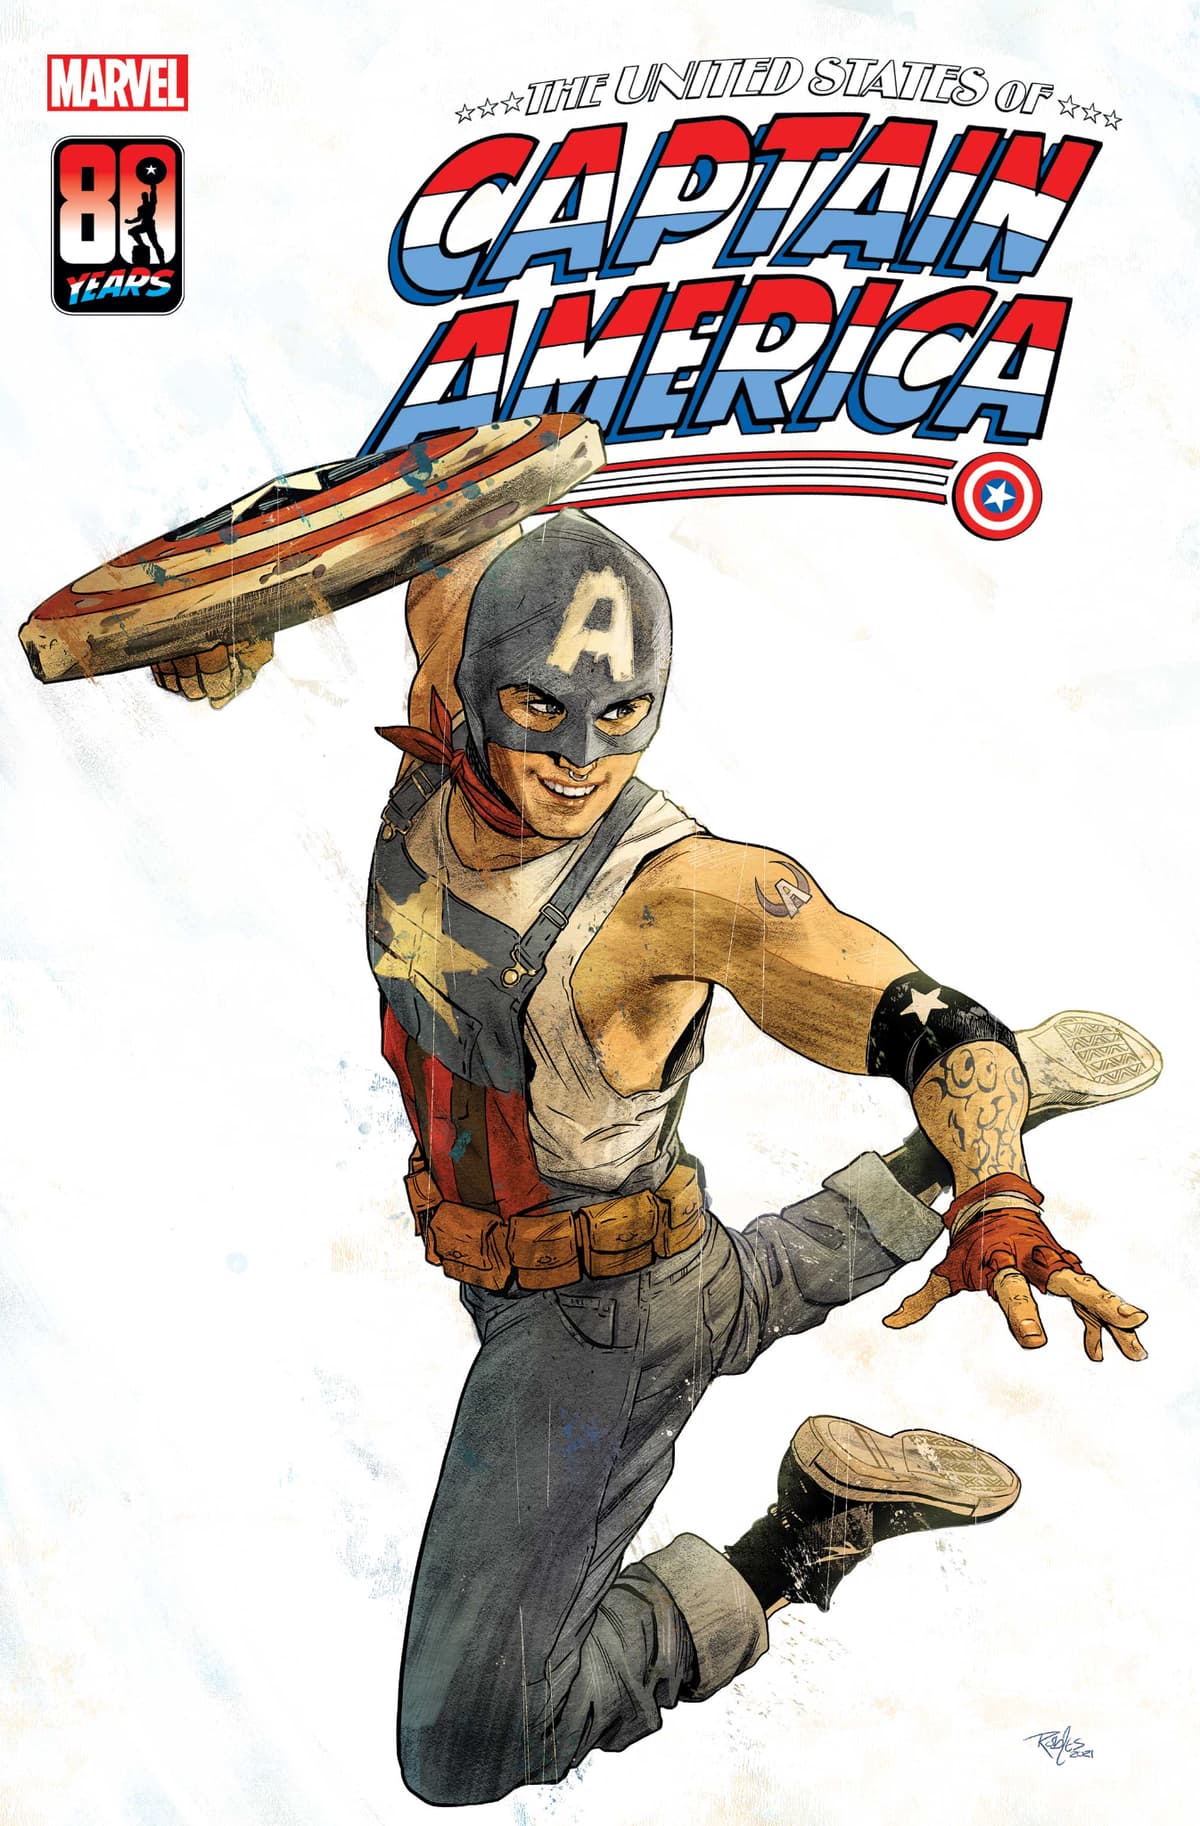 The United States Of Captain America 988833 